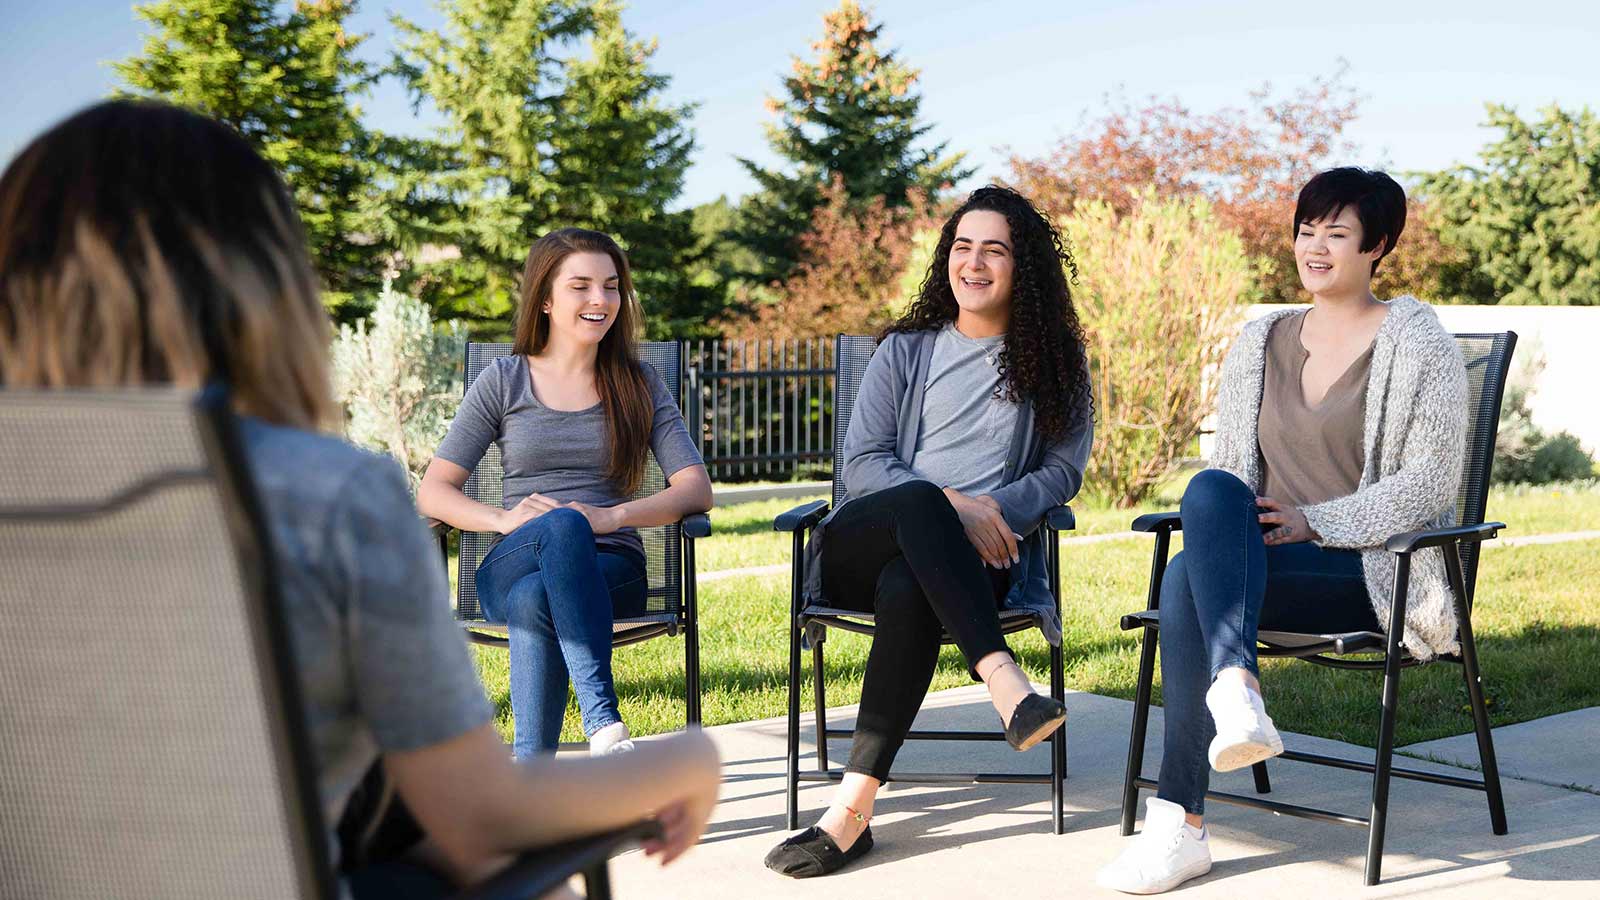 Four women are engaged in conversation while sitting in a circle of chairs outdoors.